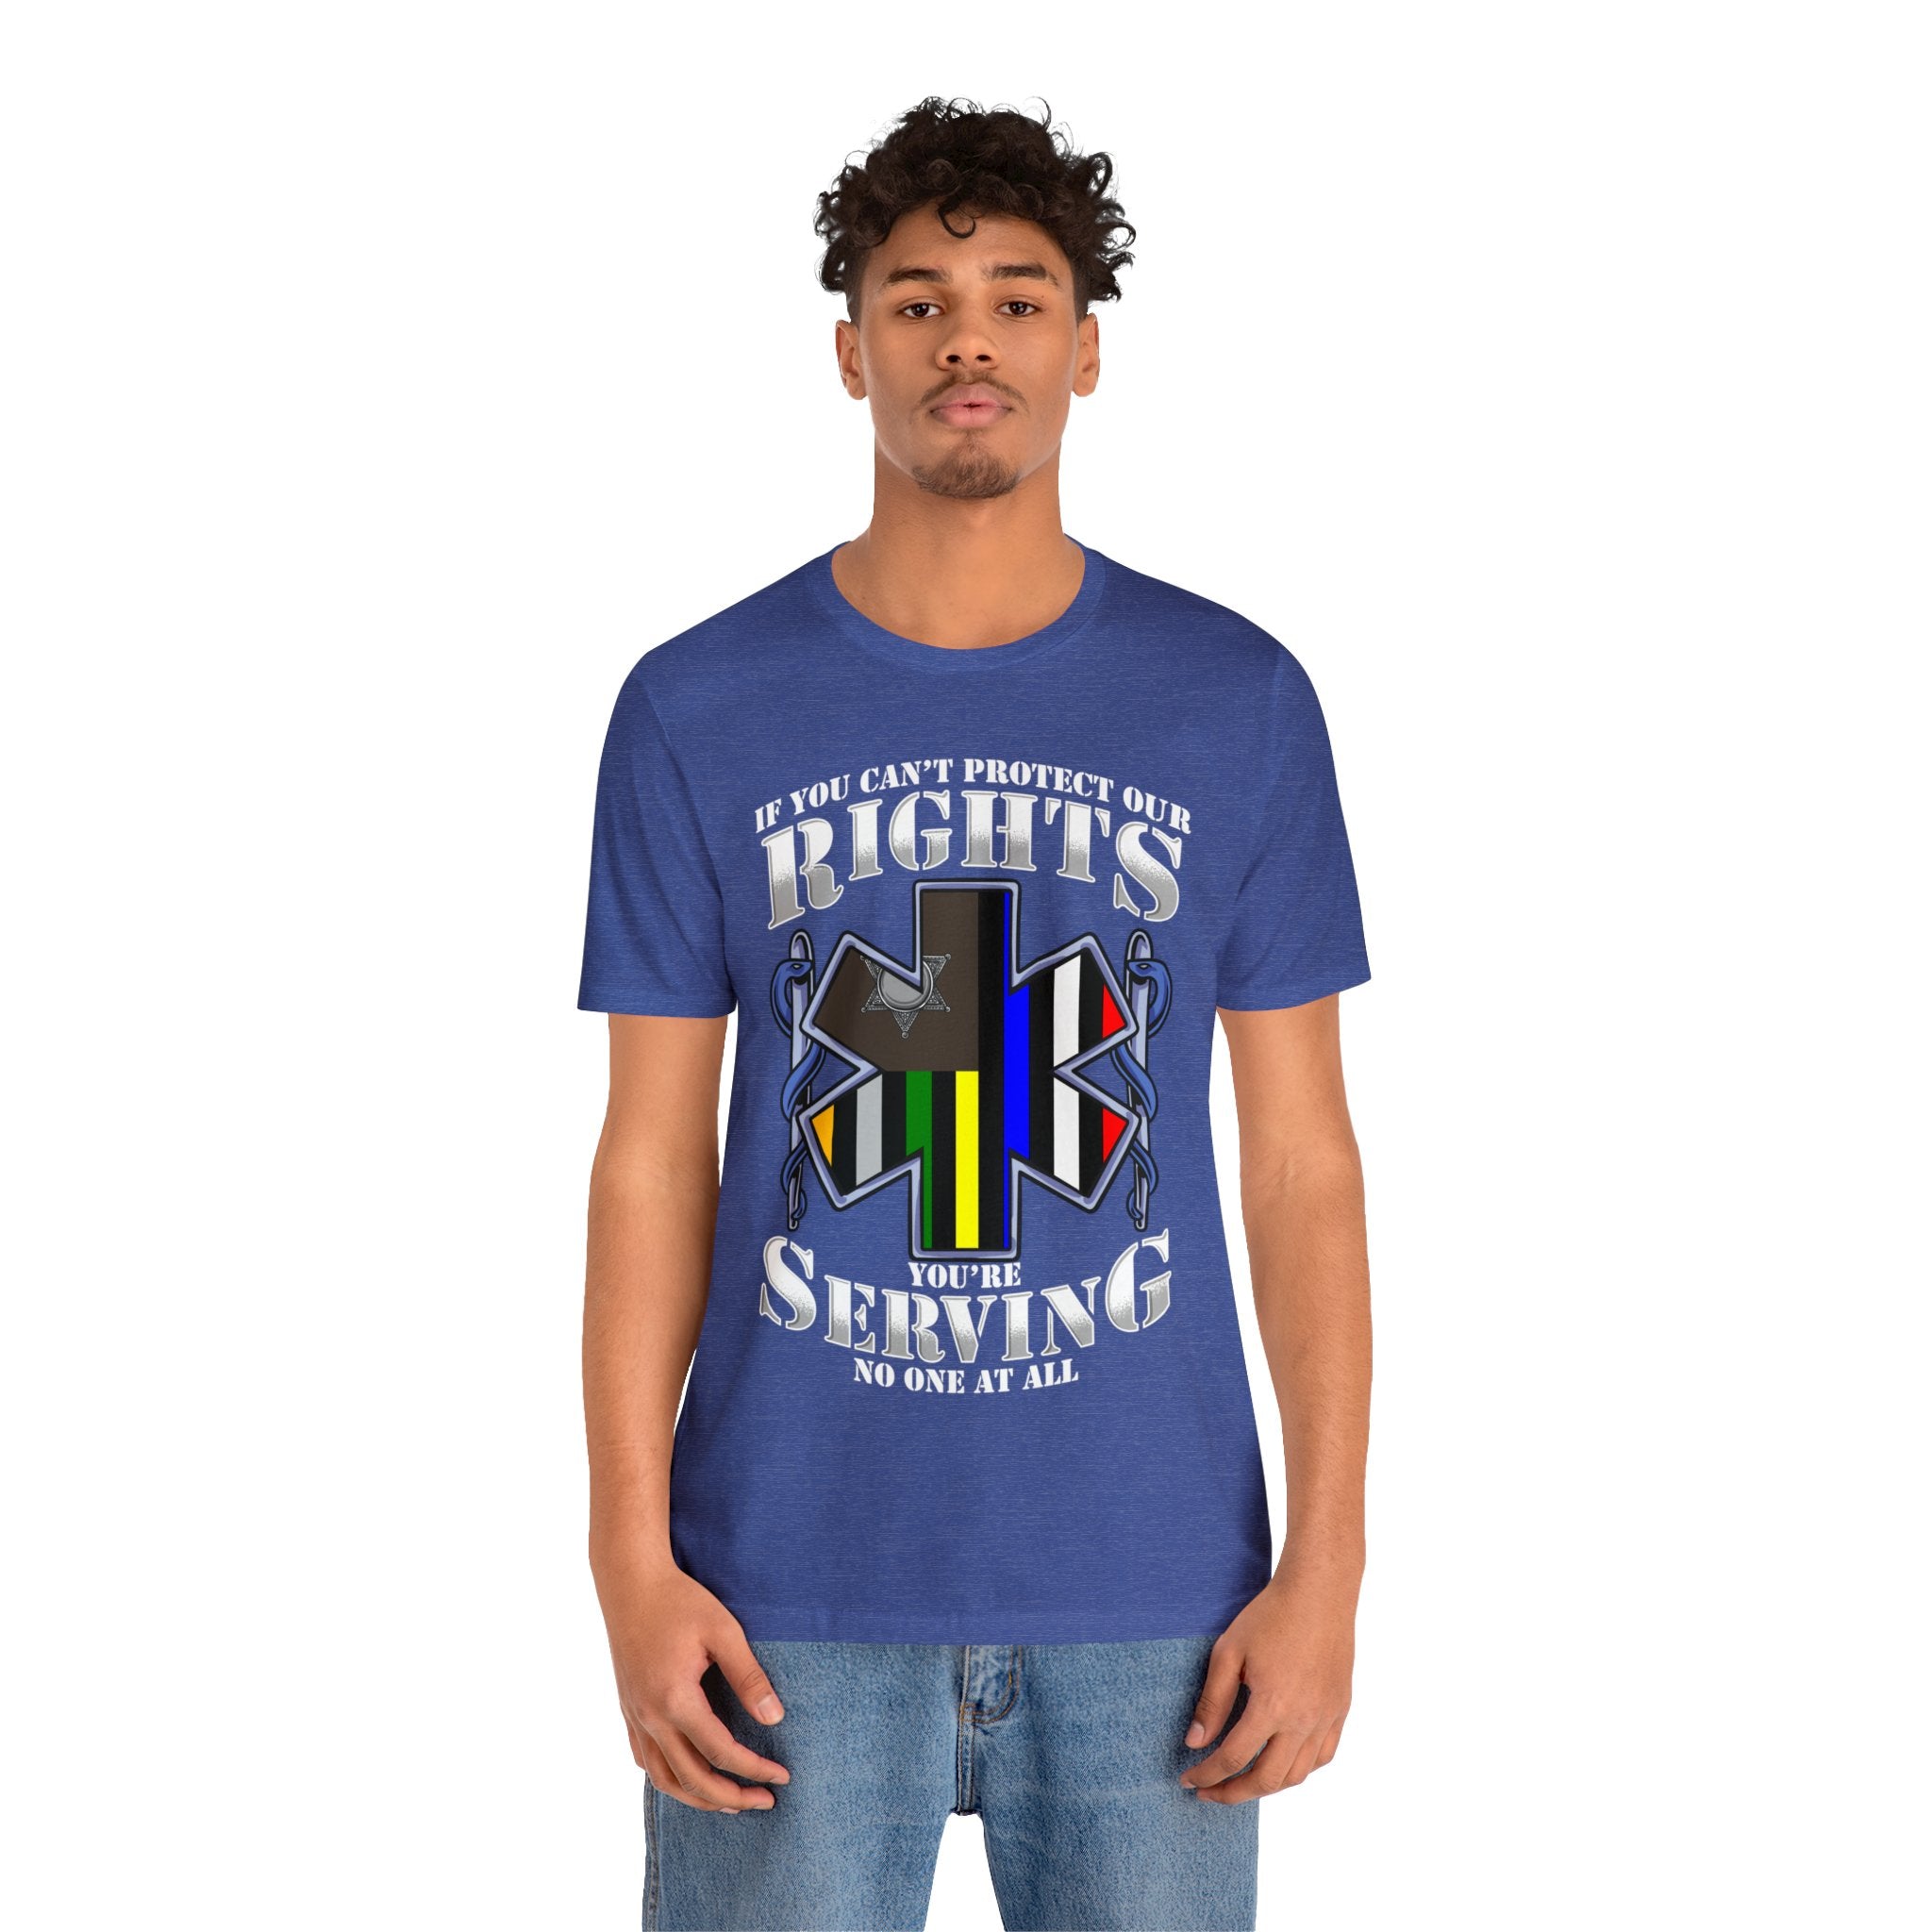 Thin EMS Line Tee - Rights/Serving